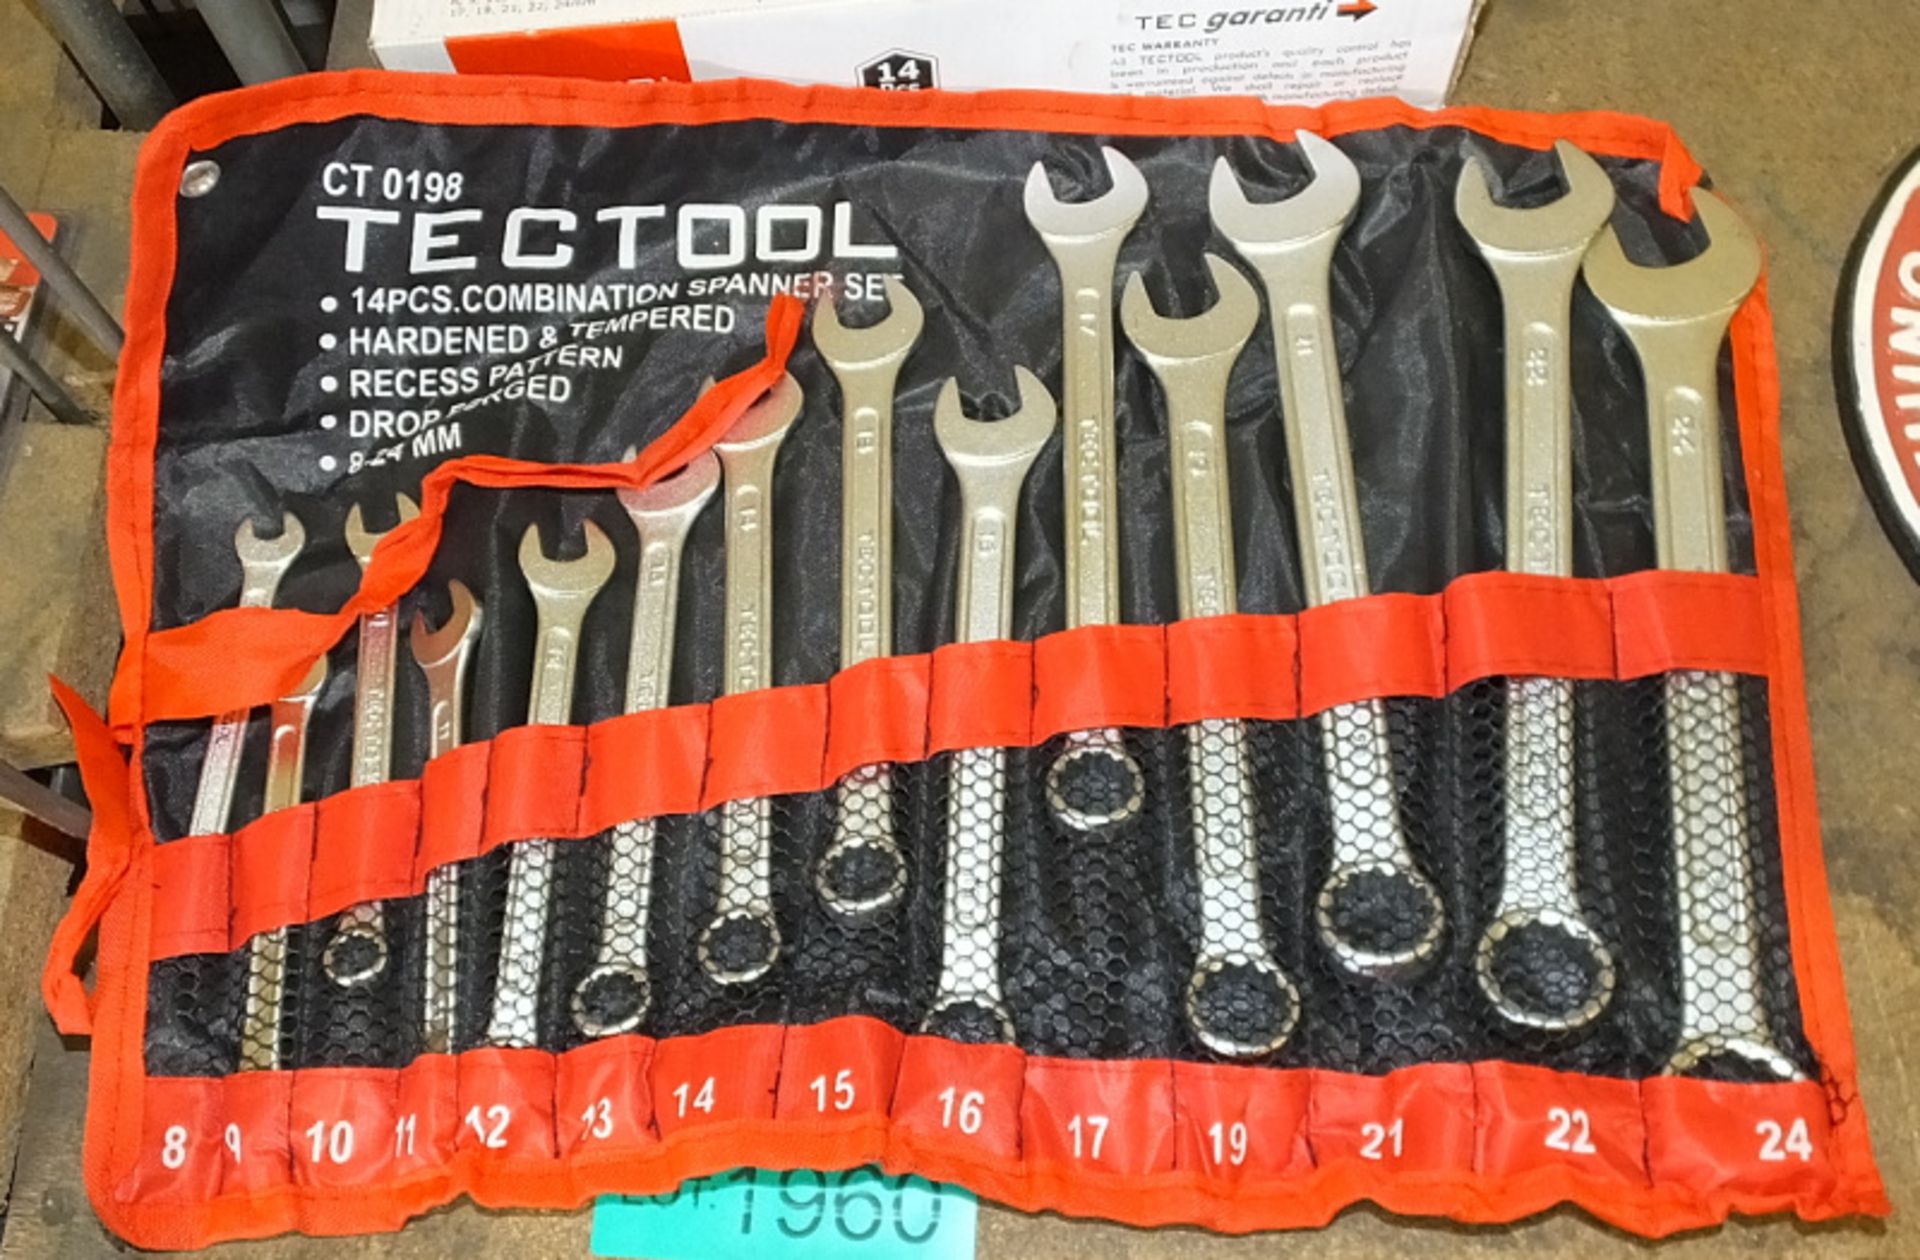 3x Tectool 14 piece combination spanner sets - Image 2 of 2